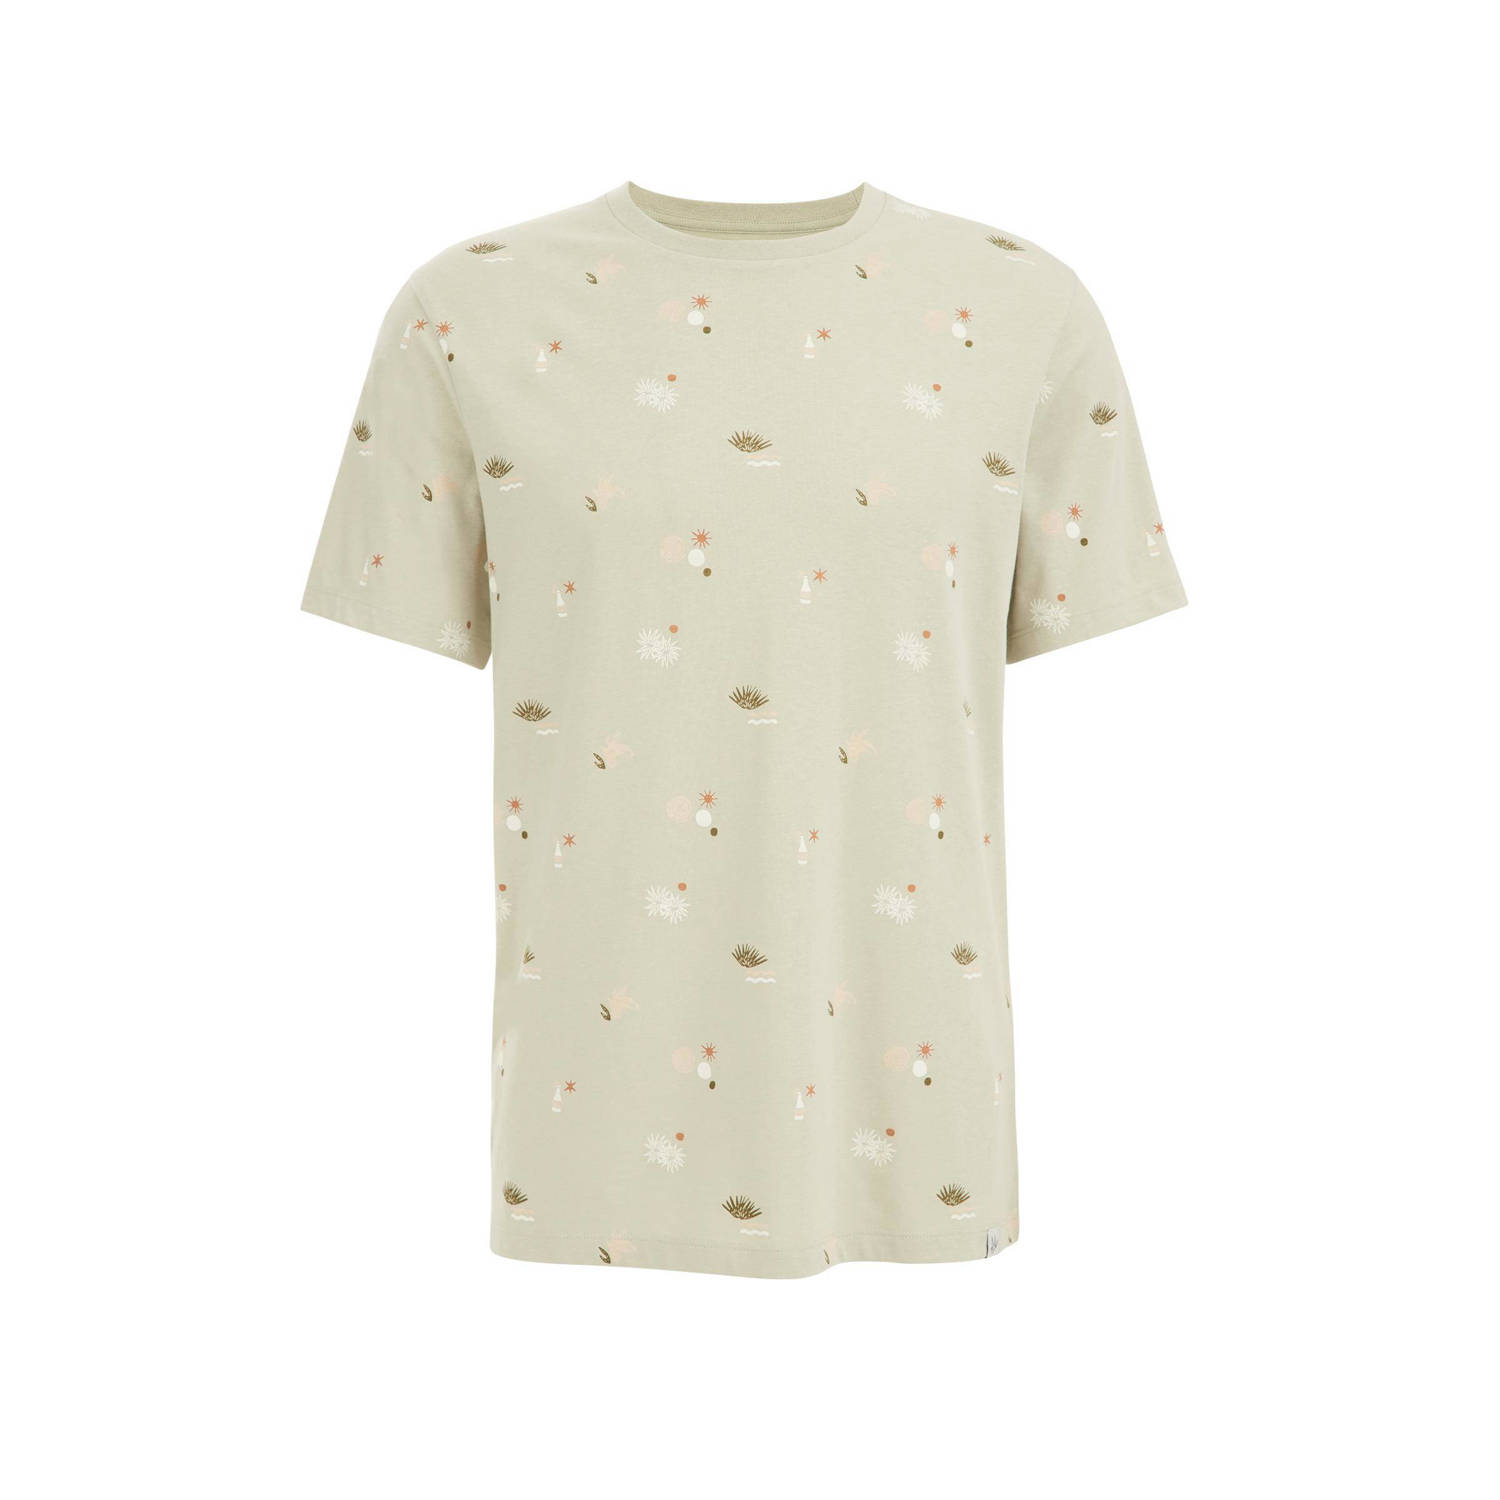 WE Fashion slim fit T-shirt met all over print morning dew